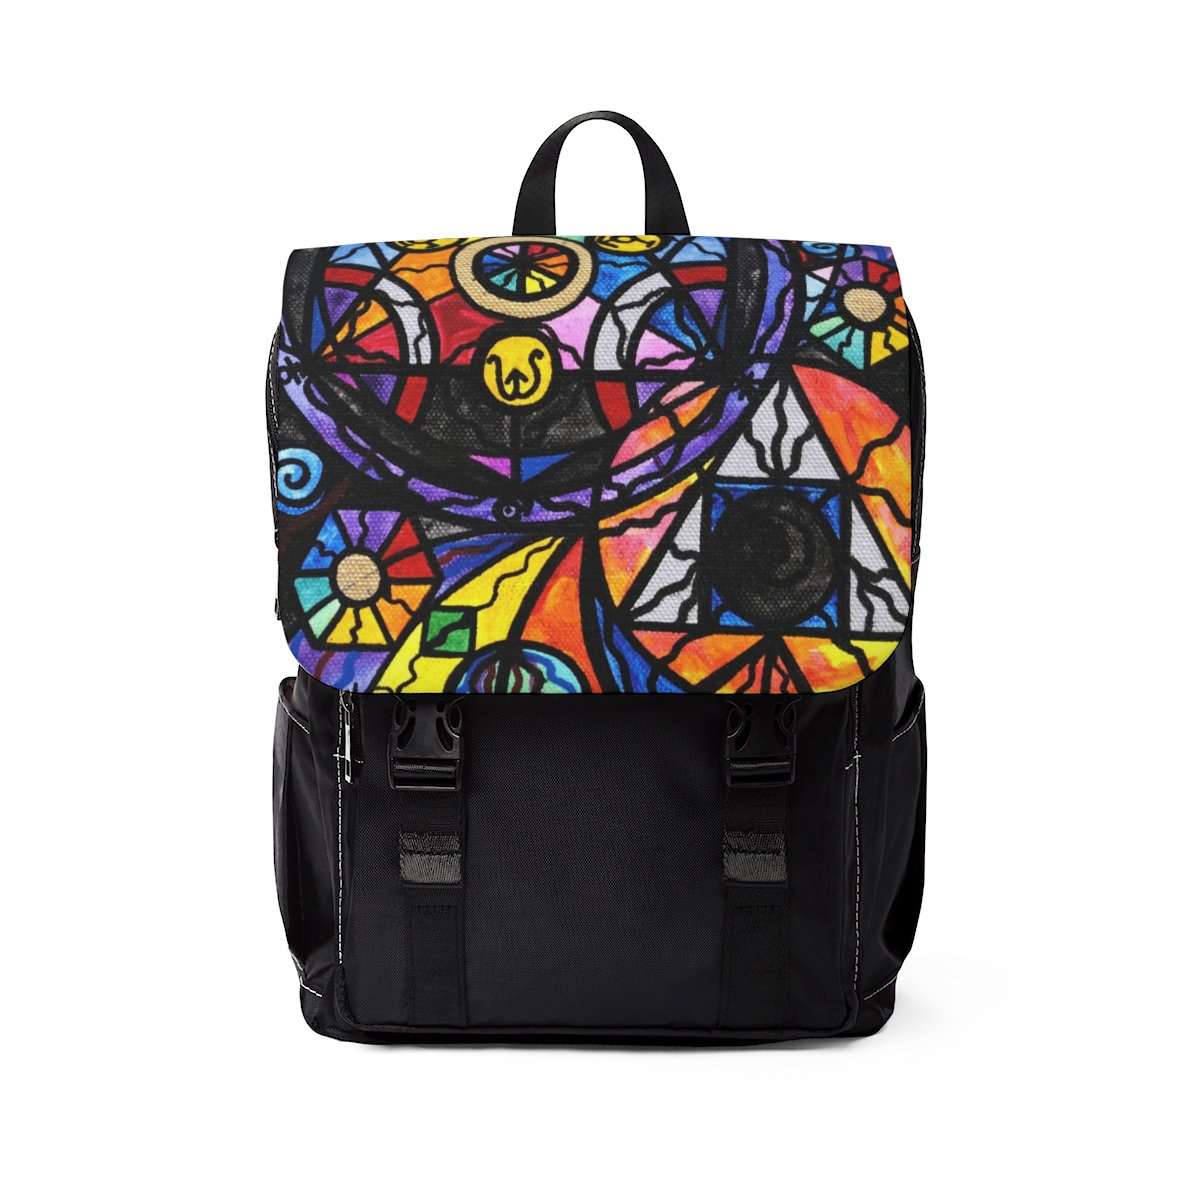 shop-for-the-latest-alchemy-unisex-casual-shoulder-backpack-online-now_0.jpg